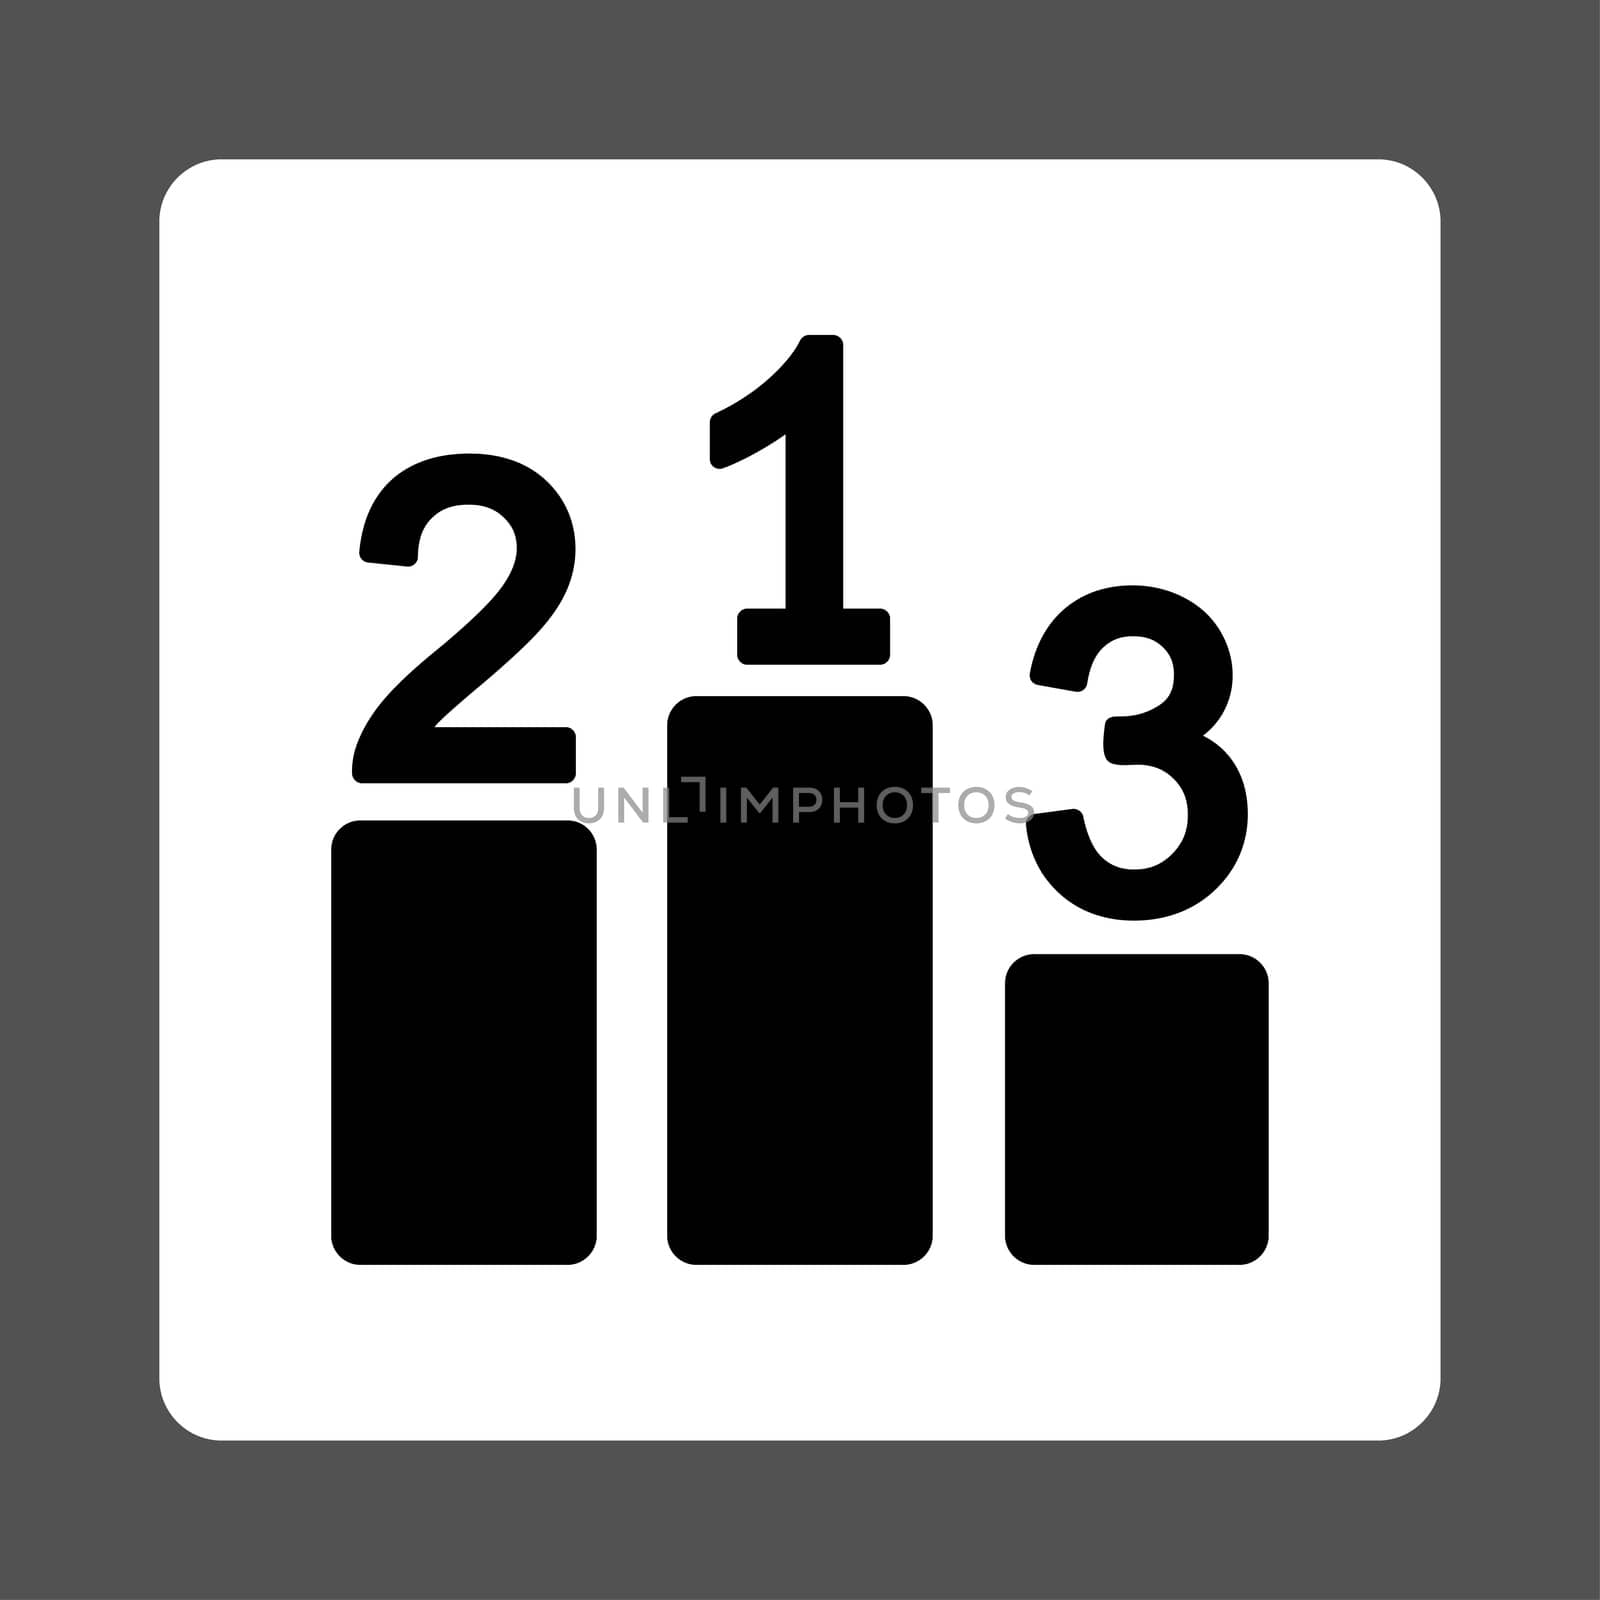 Pedestal icon from Award Buttons OverColor Set. Icon style is black and white colors, flat rounded square button, gray background.